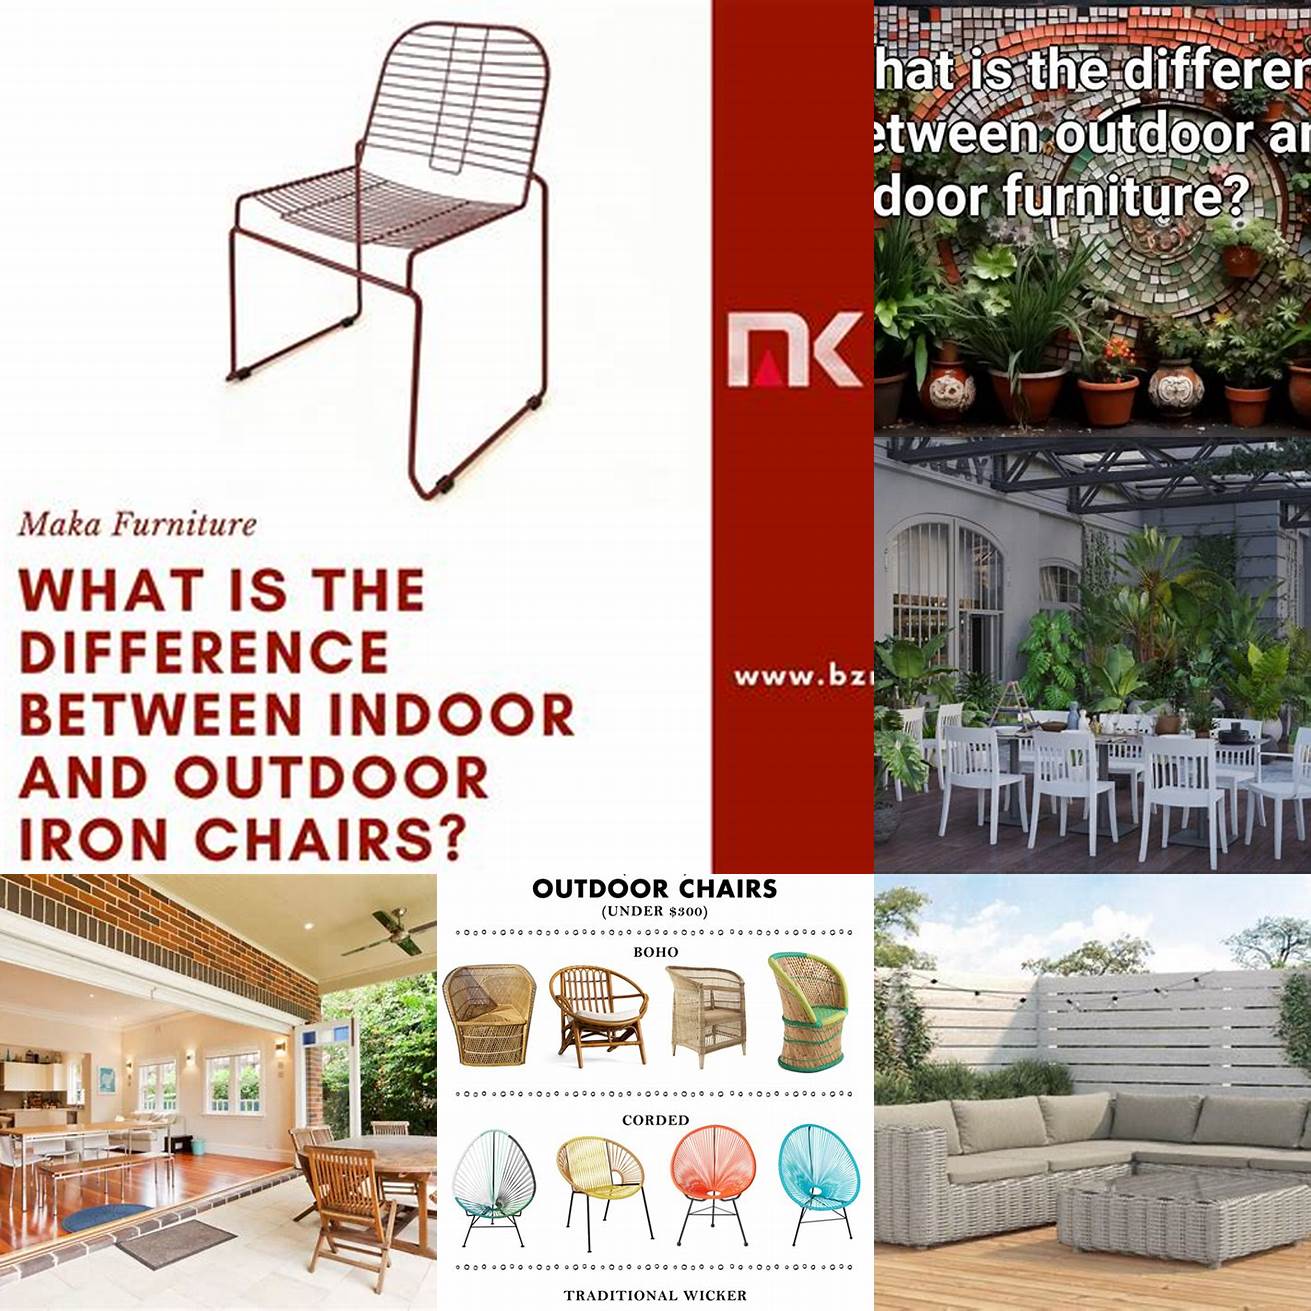 The differences between outdoor and indoor furniture